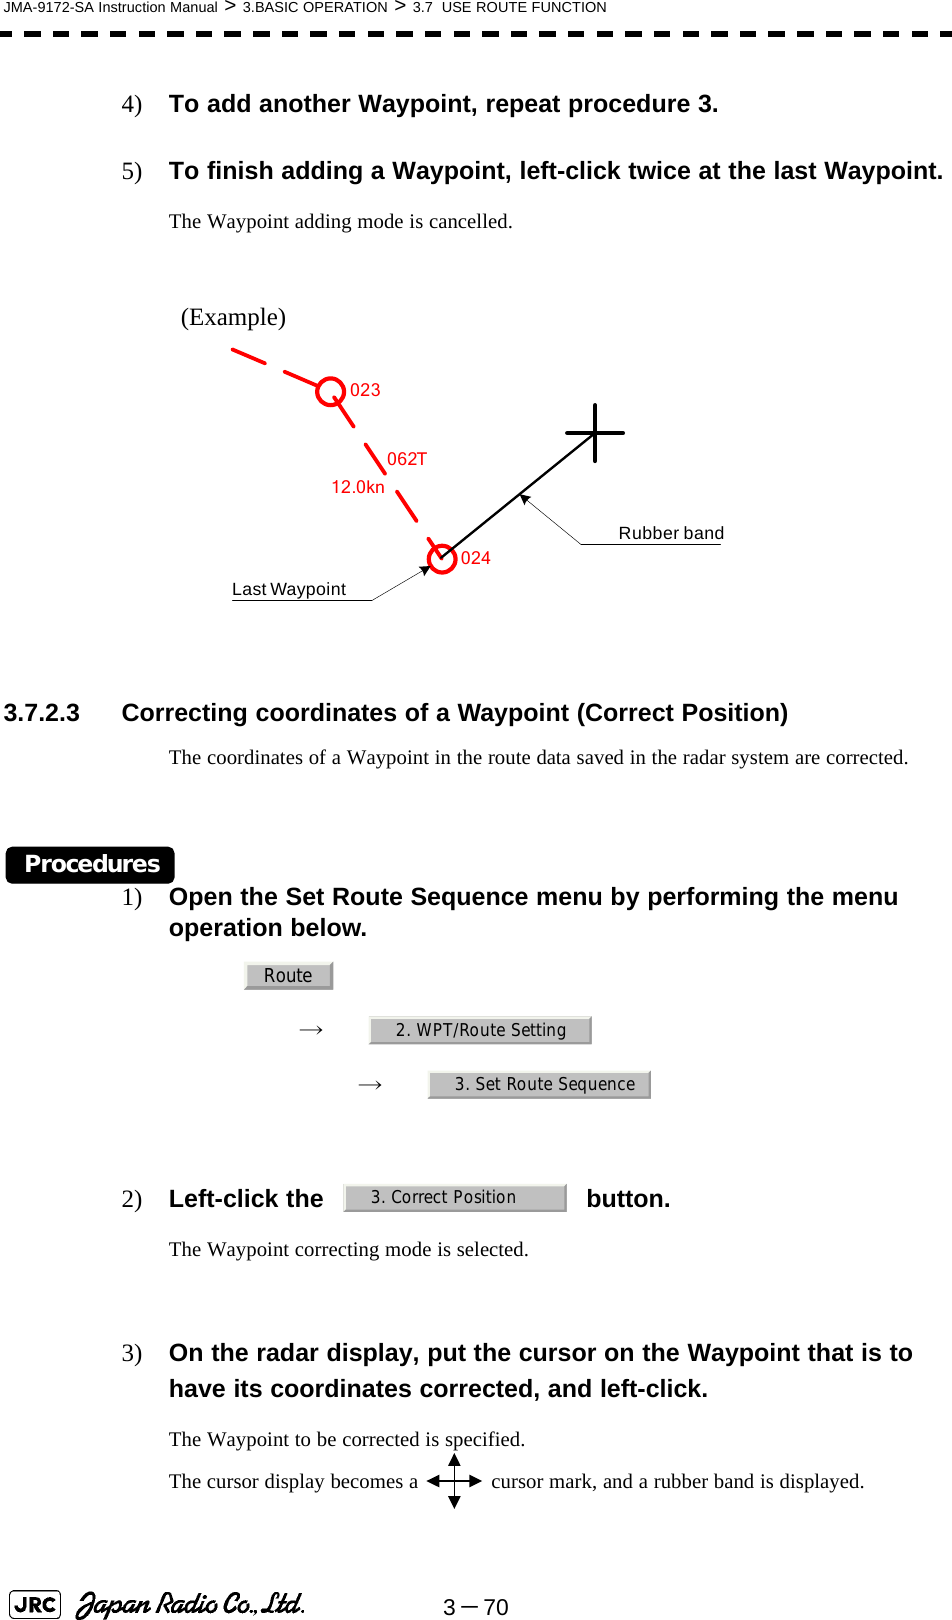 3－70JMA-9172-SA Instruction Manual &gt; 3.BASIC OPERATION &gt; 3.7  USE ROUTE FUNCTION4) To add another Waypoint, repeat procedure 3.5) To finish adding a Waypoint, left-click twice at the last Waypoint.The Waypoint adding mode is cancelled.(Example) 3.7.2.3 Correcting coordinates of a Waypoint (Correct Position)The coordinates of a Waypoint in the route data saved in the radar system are corrected.Procedures1) Open the Set Route Sequence menu by performing the menu operation below.→　→　2) Left-click the button.The Waypoint correcting mode is selected.3) On the radar display, put the cursor on the Waypoint that is to have its coordinates corrected, and left-click.The Waypoint to be corrected is specified.The cursor display becomes a   cursor mark, and a rubber band is displayed.062T12.0knLast WaypointRubber band023024Route2. WPT/Route Setting3. Set Route Sequence3. Correct Position